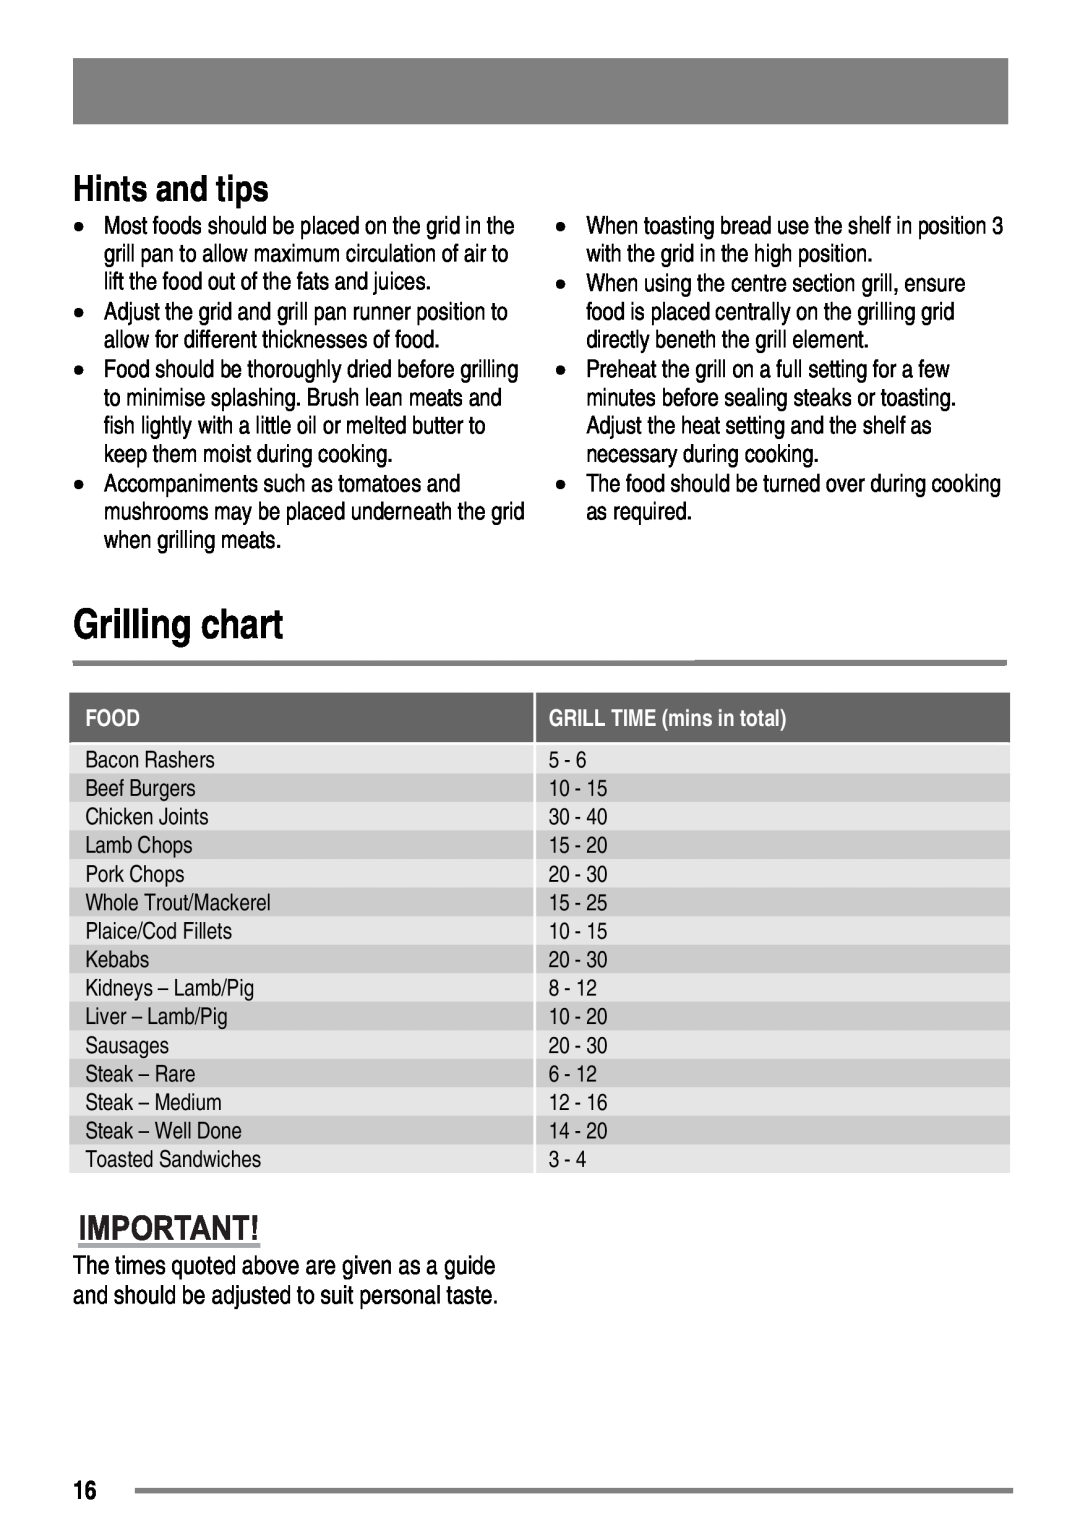 Zanussi ZKC5540 user manual Grilling chart, Hints and tips, Food, GRILL TIME mins in total 